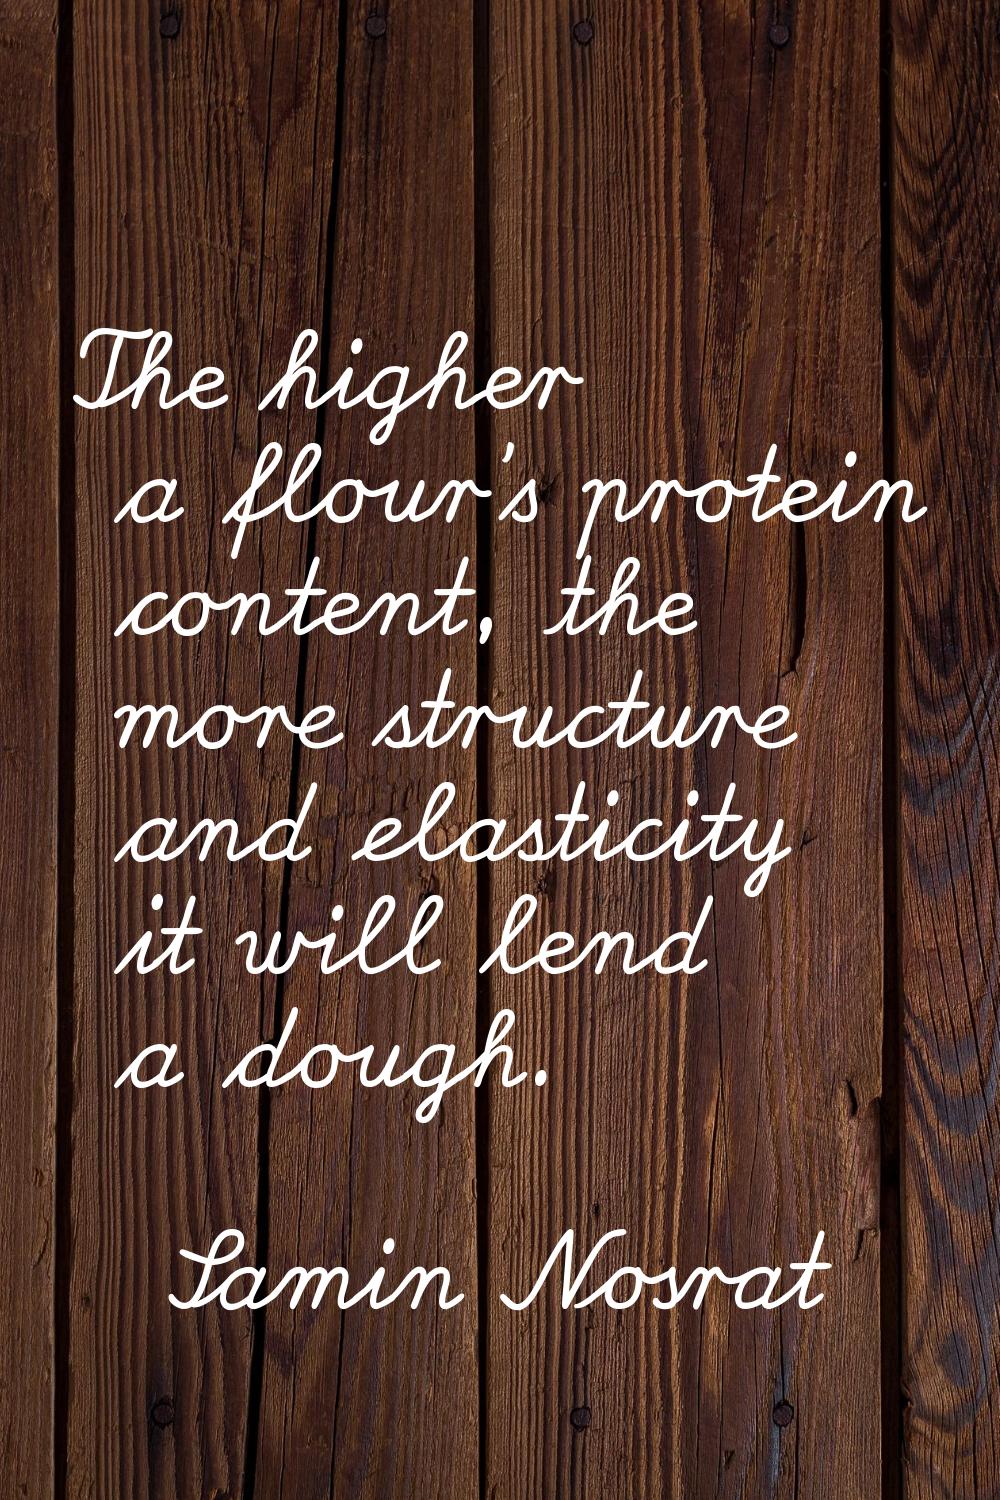 The higher a flour's protein content, the more structure and elasticity it will lend a dough.